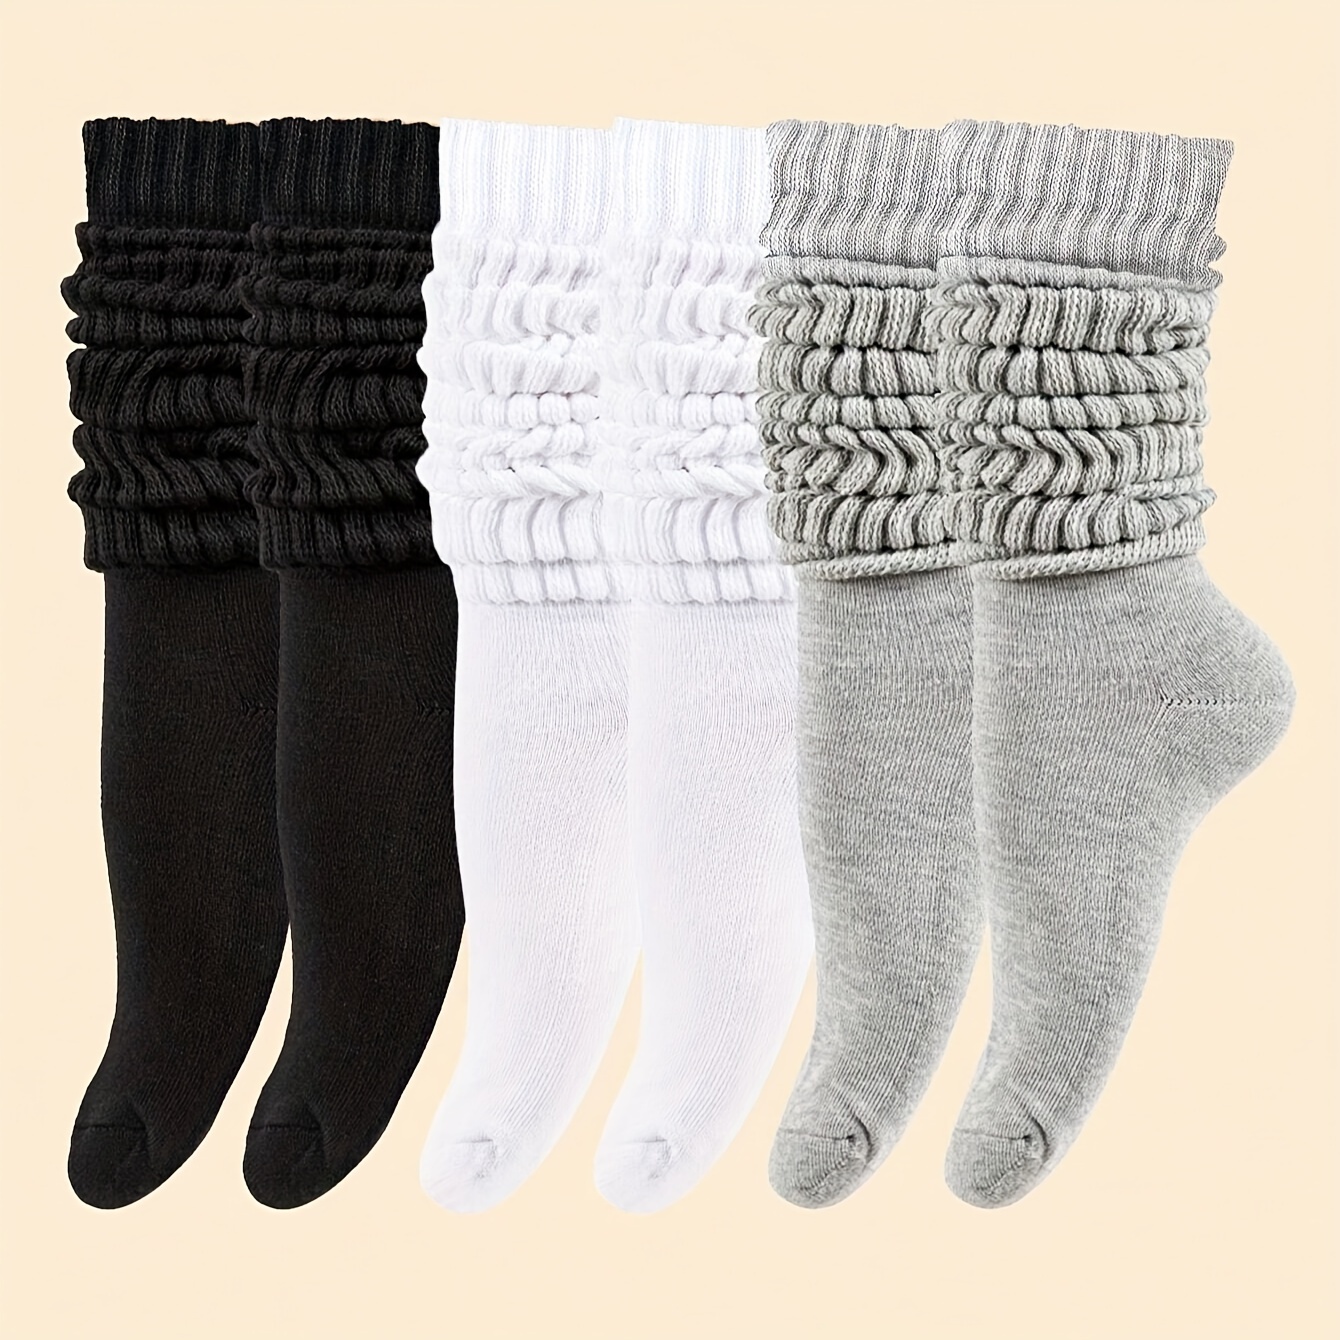 4 Pairs Thin Over The Knee Socks, Comfy & Breathable Thigh High Socks,  Stretchy Stockings, Women's Stockings & Hosiery for Music Festival